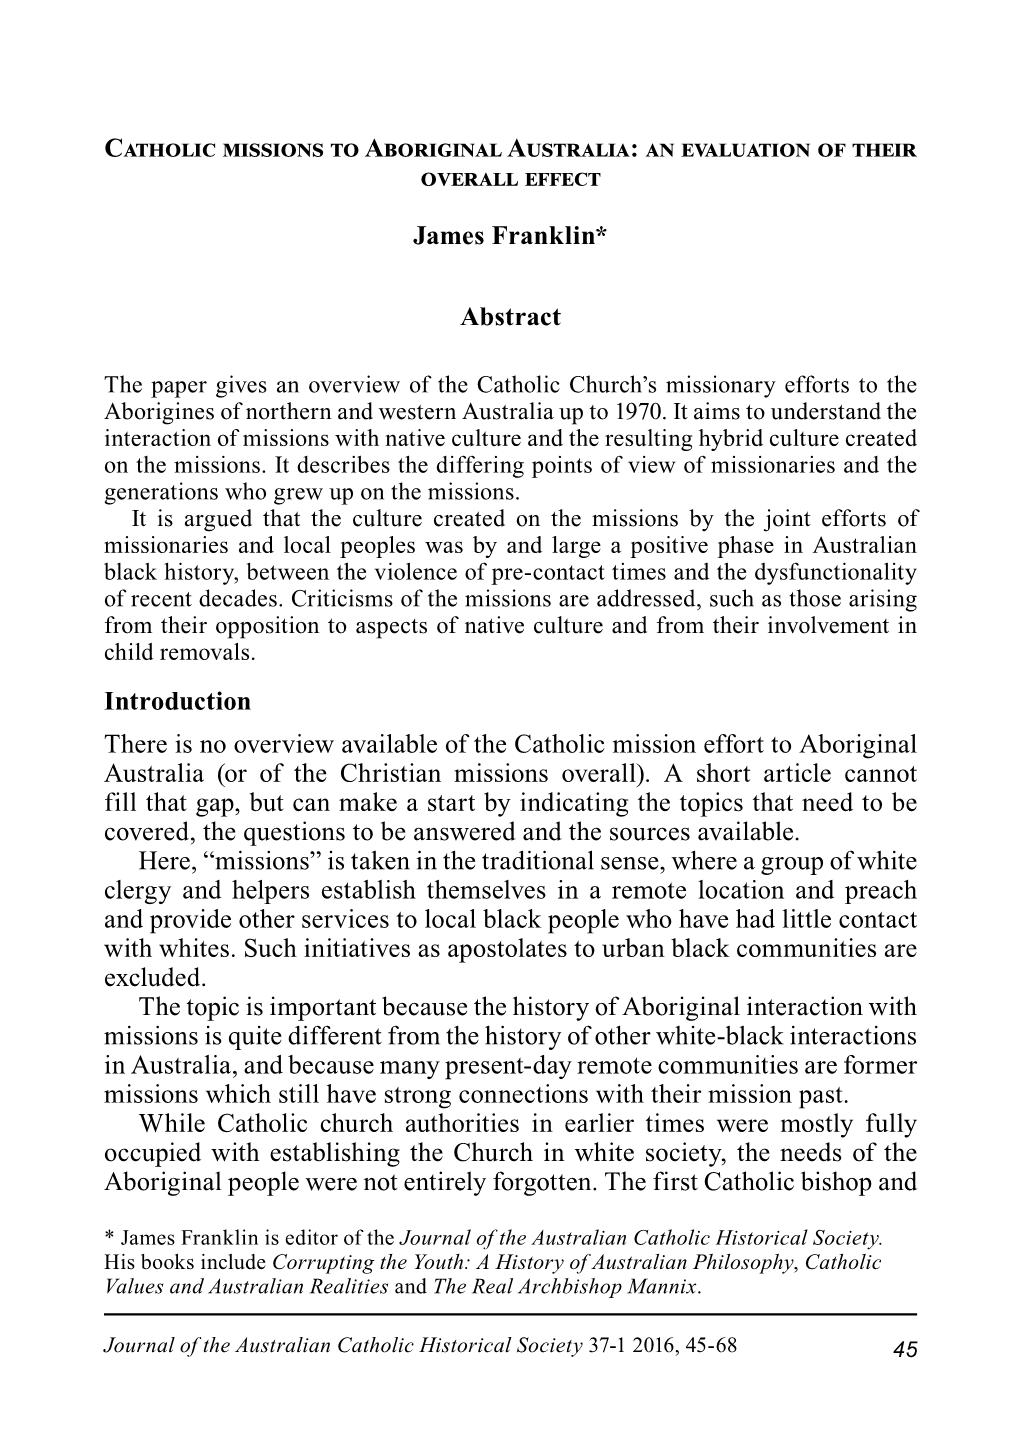 Catholic Missions to Aboriginal Australia: an Evaluation of Their Overall Effect